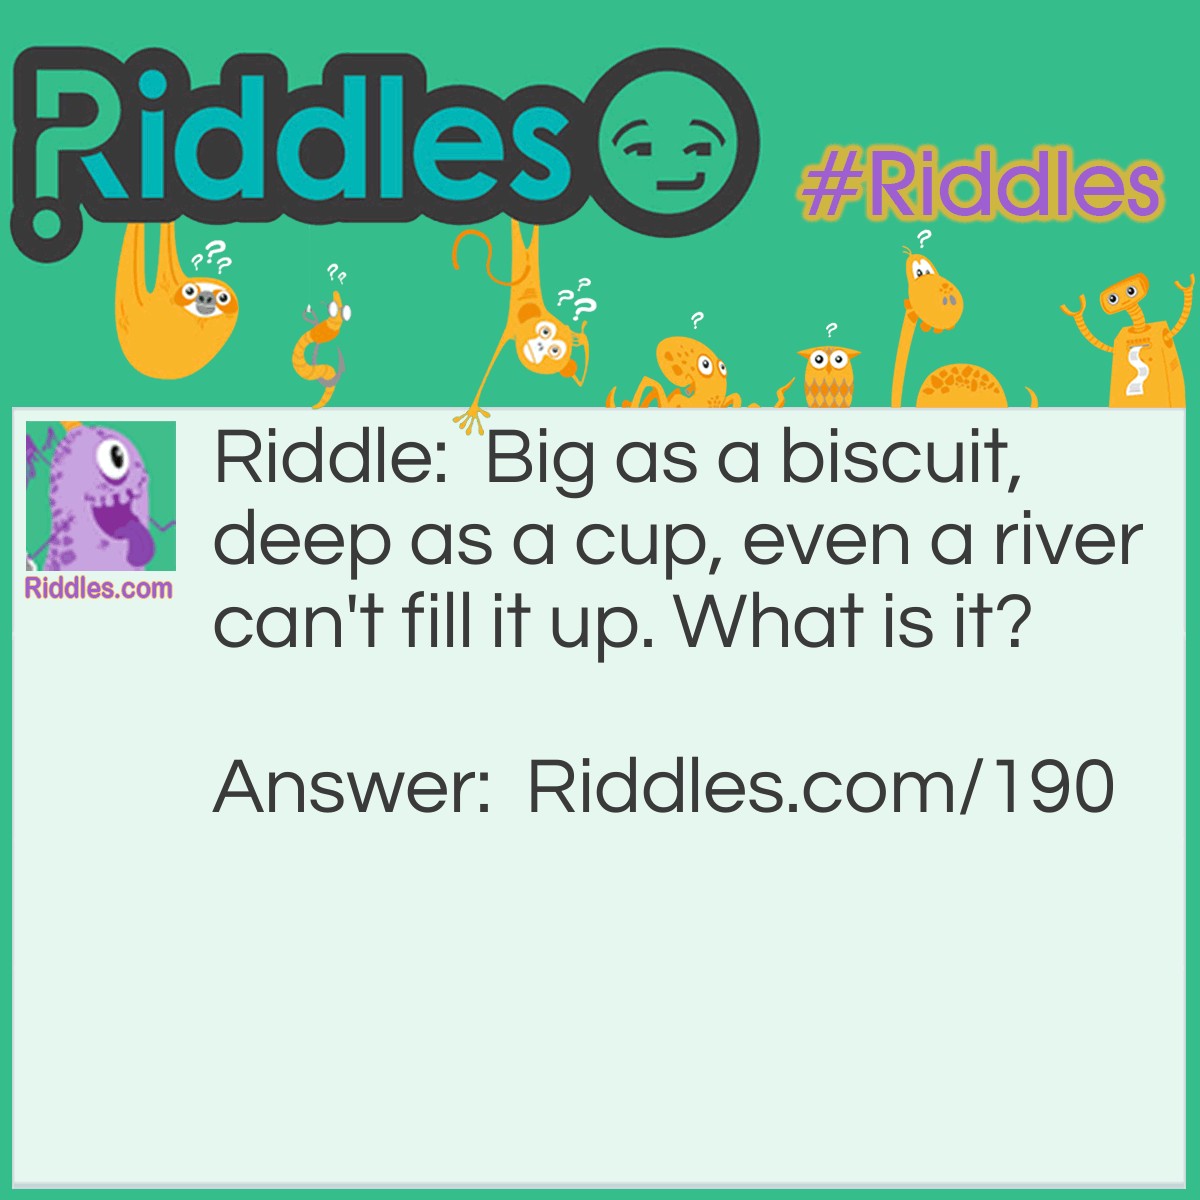 Riddle: Big as a biscuit, deep as a cup, even a river can't fill it up. What is it? Answer: A kitchen strainer.